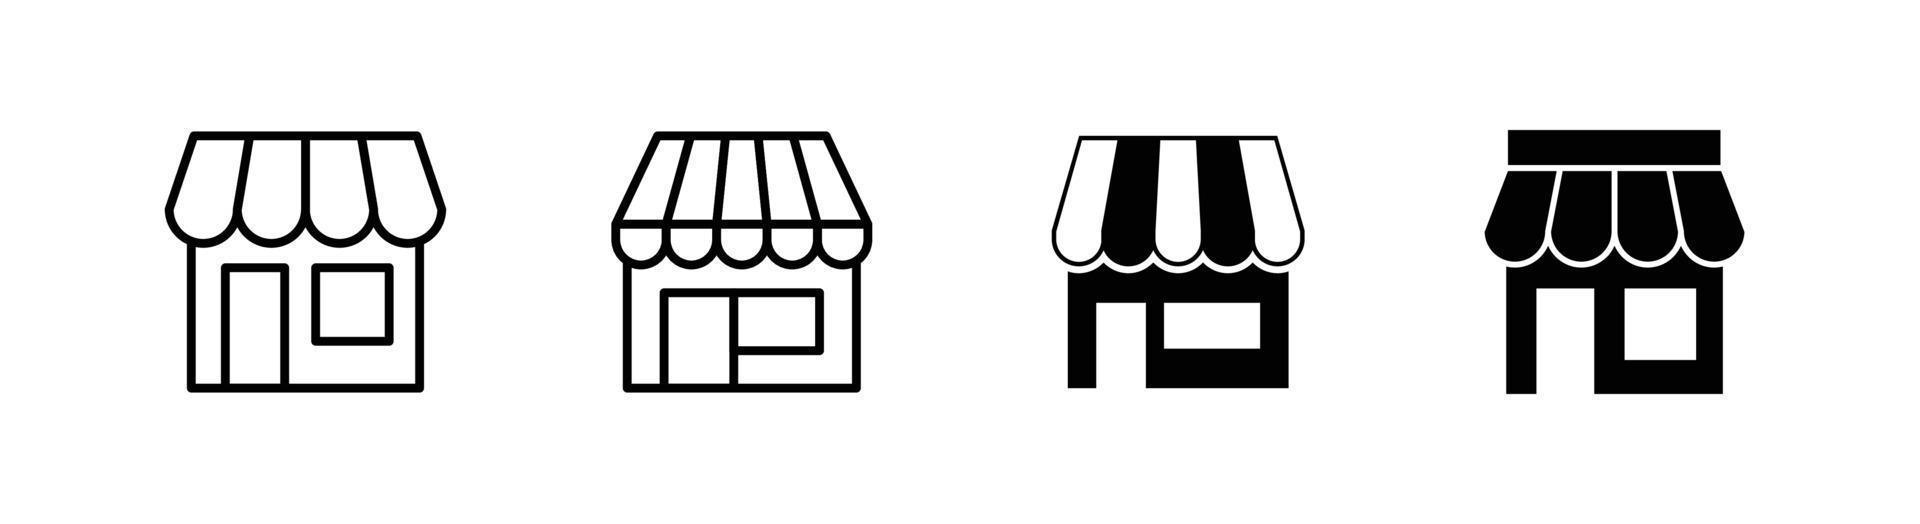 Store icon design, outlined and flat style vector